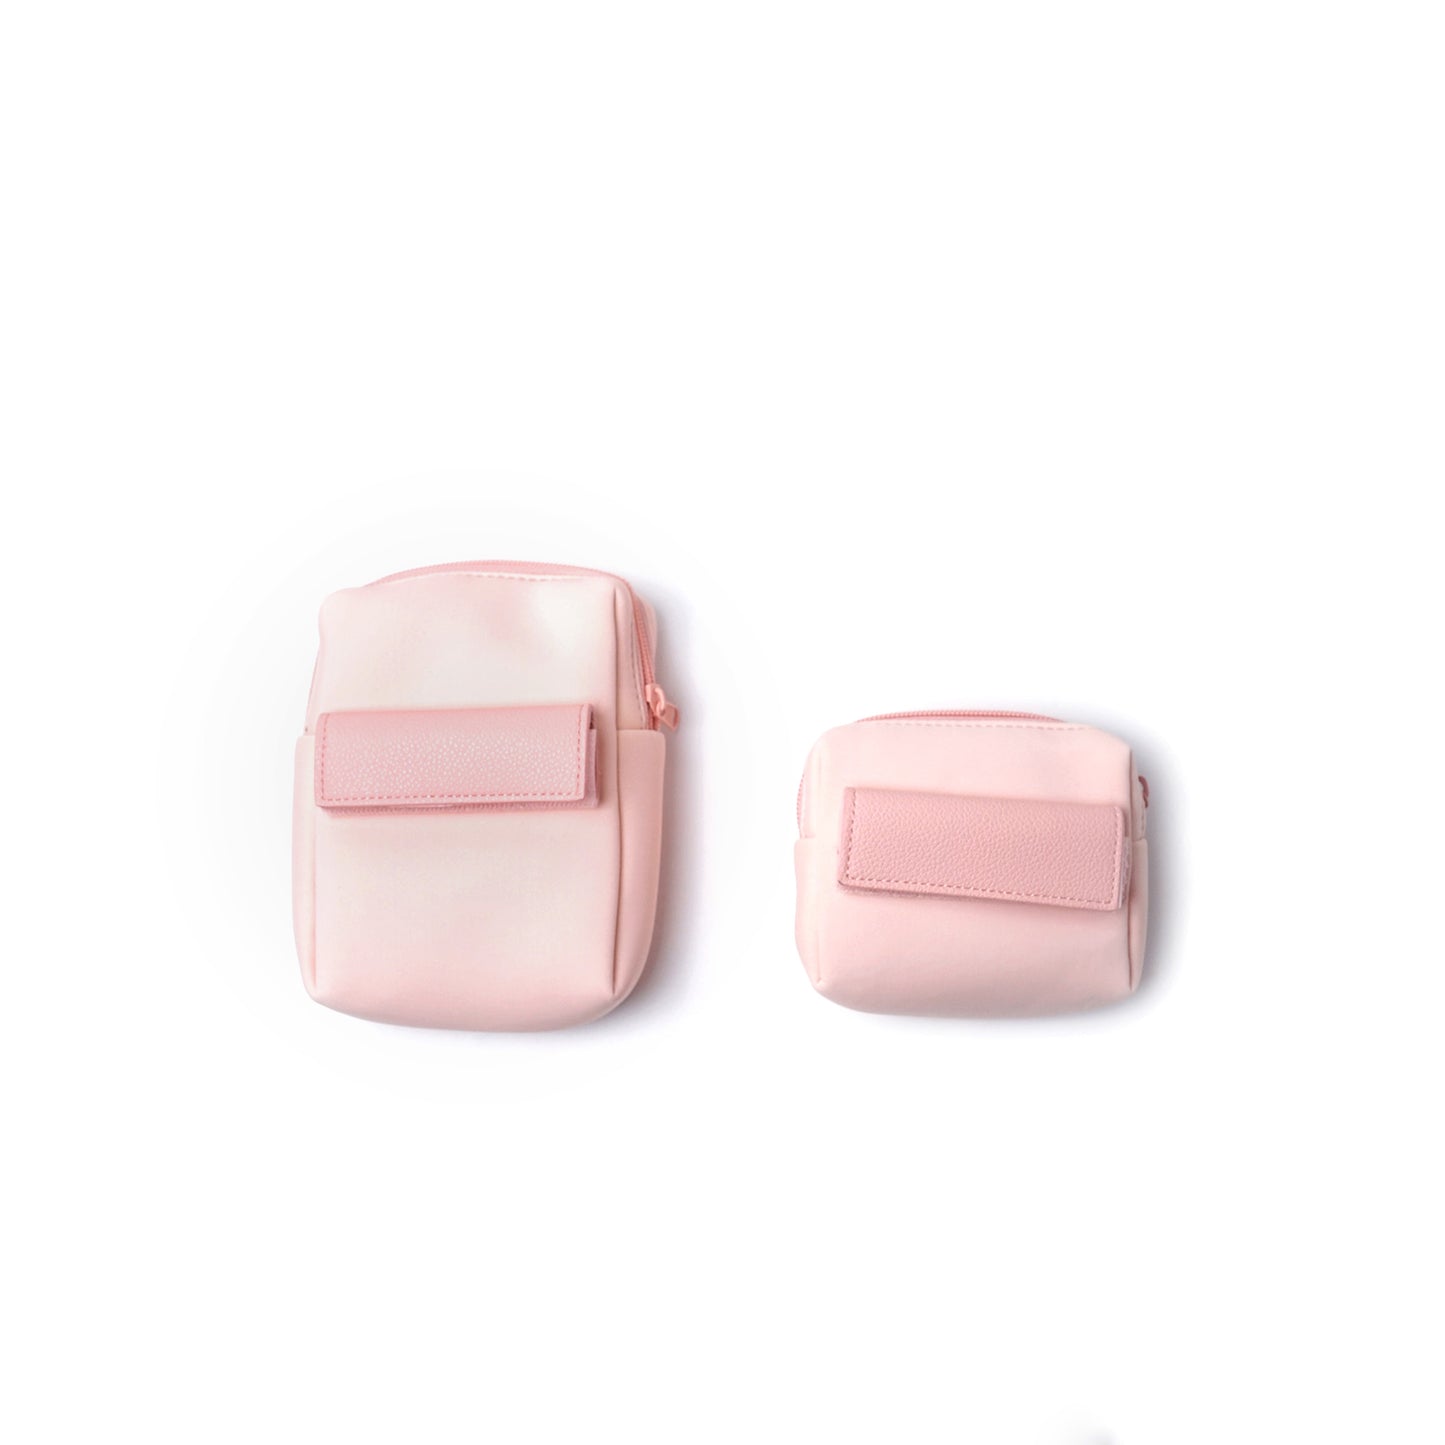 GO! With Ease Pouch Peach